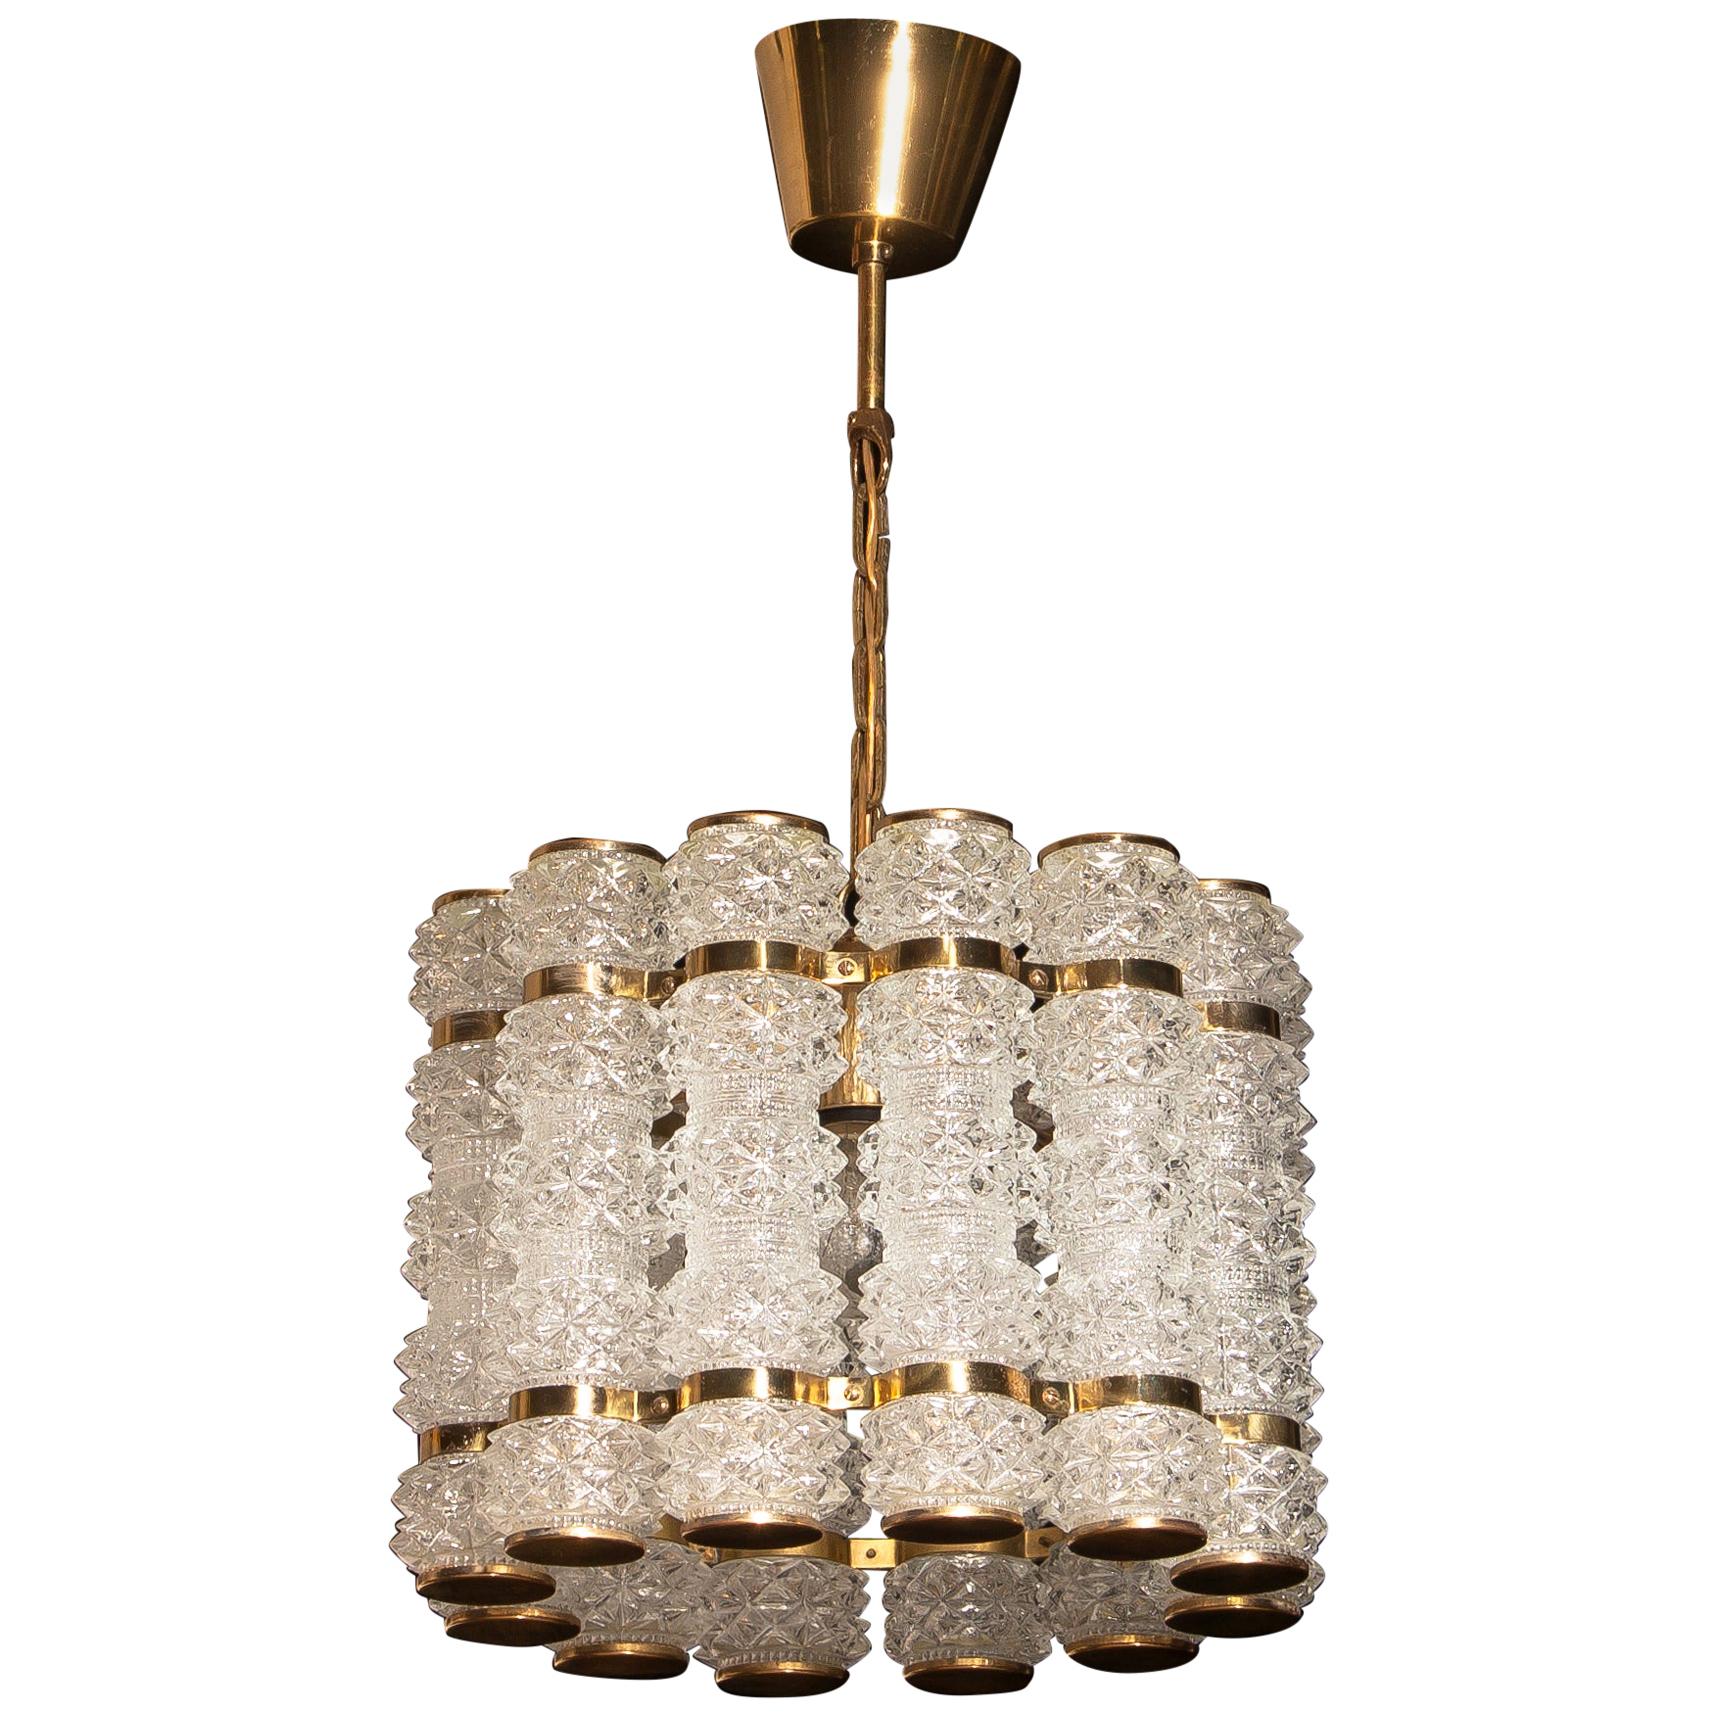 Beautiful and in perfect condition brass chandelier or pendant with twelve crystal cylinders.
Designed and manufactured in by Tyringe Konsthantverk, Sweden.
All crystal cylinders are made by Orrefors, Sweden.
Wired for 220 and 110 volts. Bulb